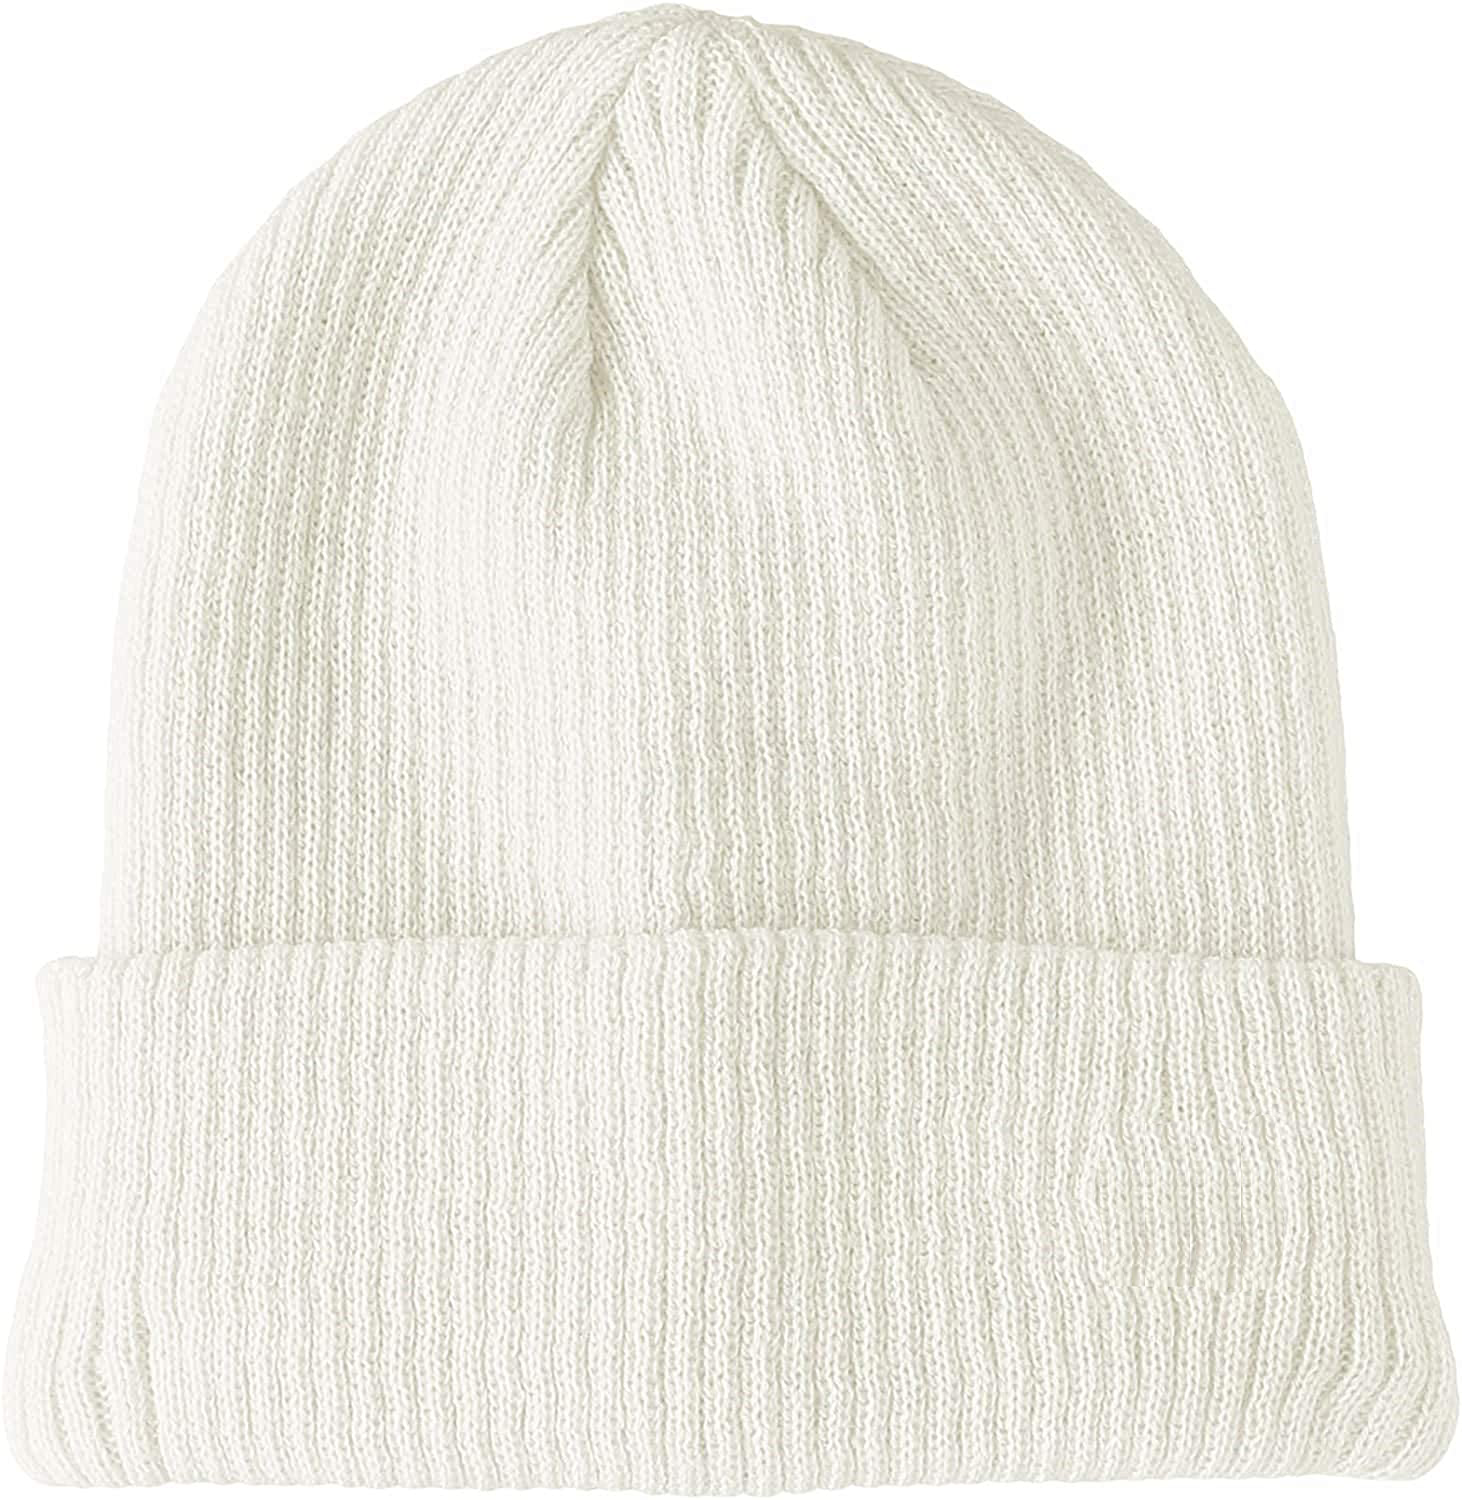 Men\'s knitted hat